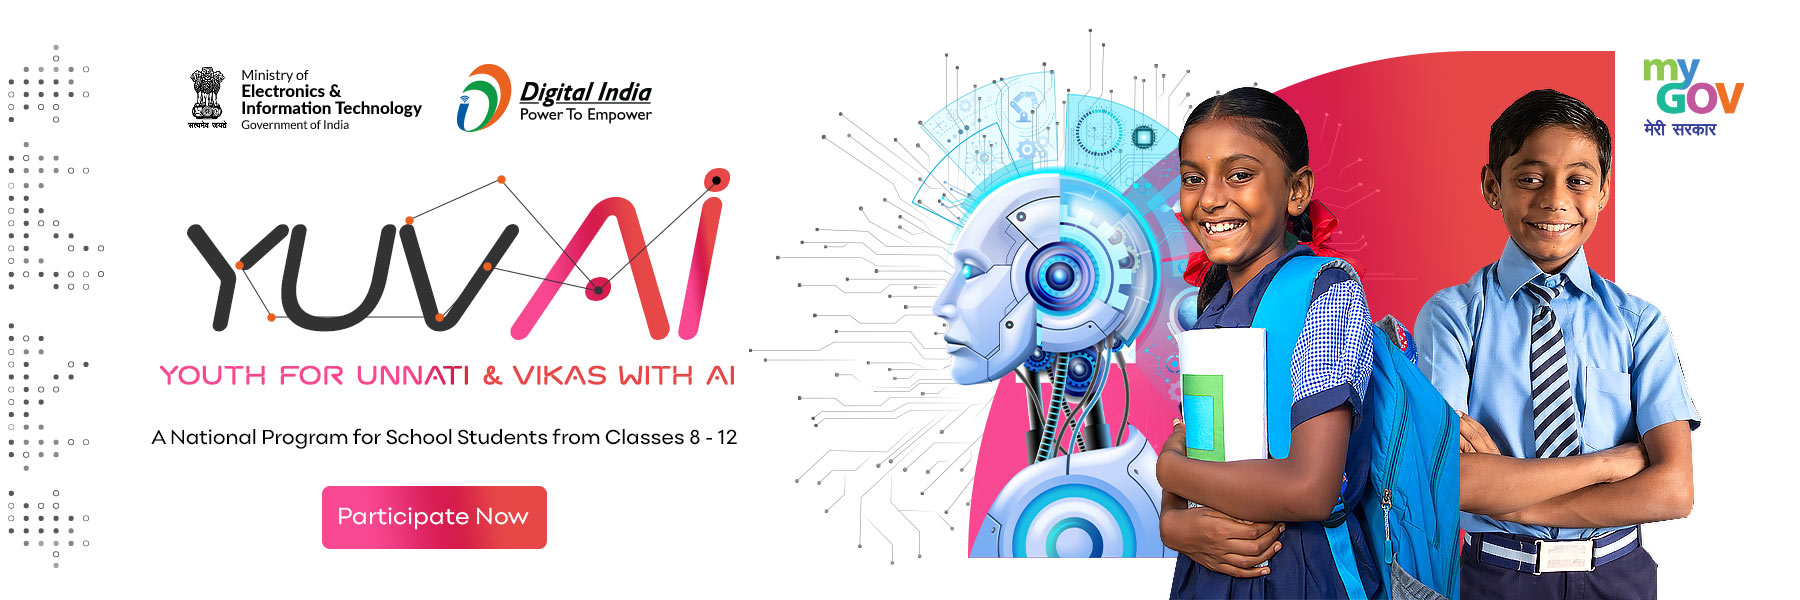 AI for Youth